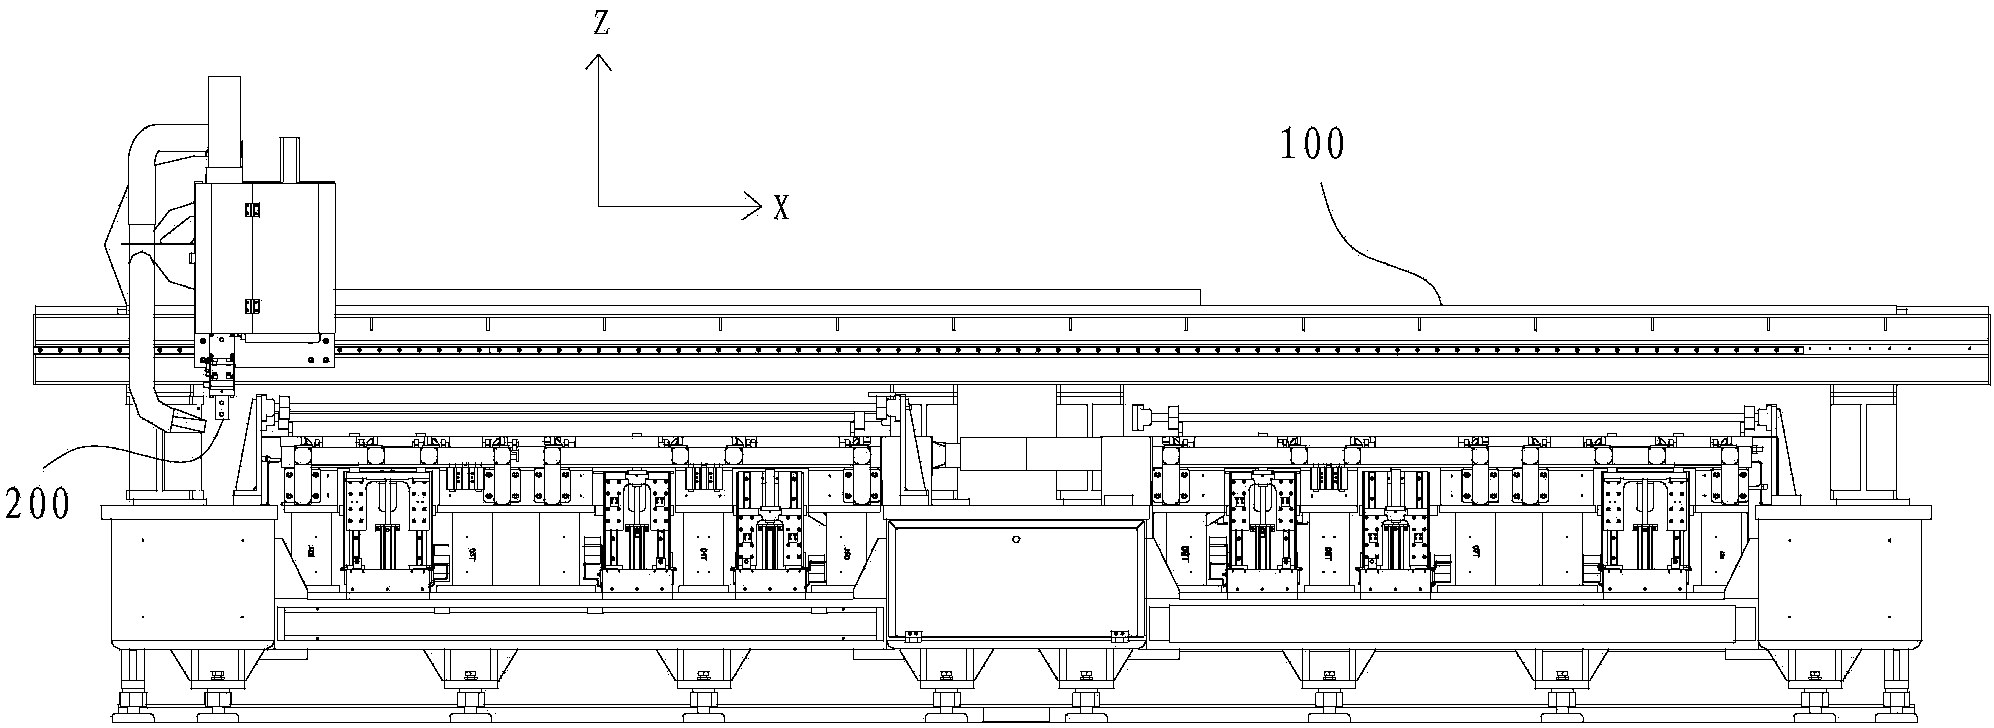 Tailored blank laser welding equipment and tailored blank laser welding method